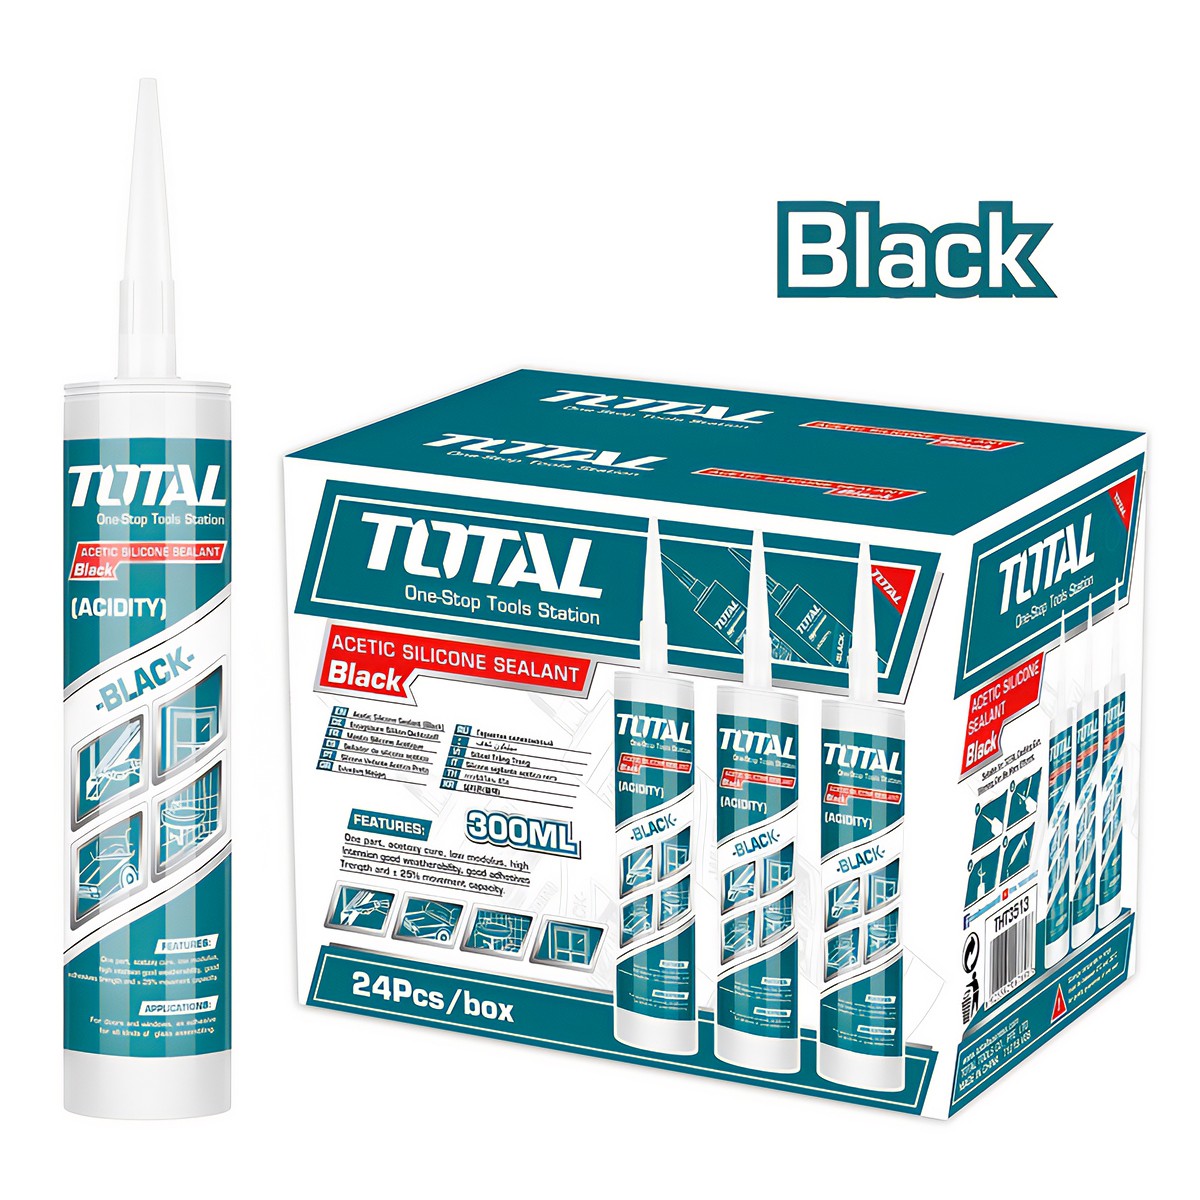 TOTAL ACETIC SILICONE SEALANT BLACK 300ML